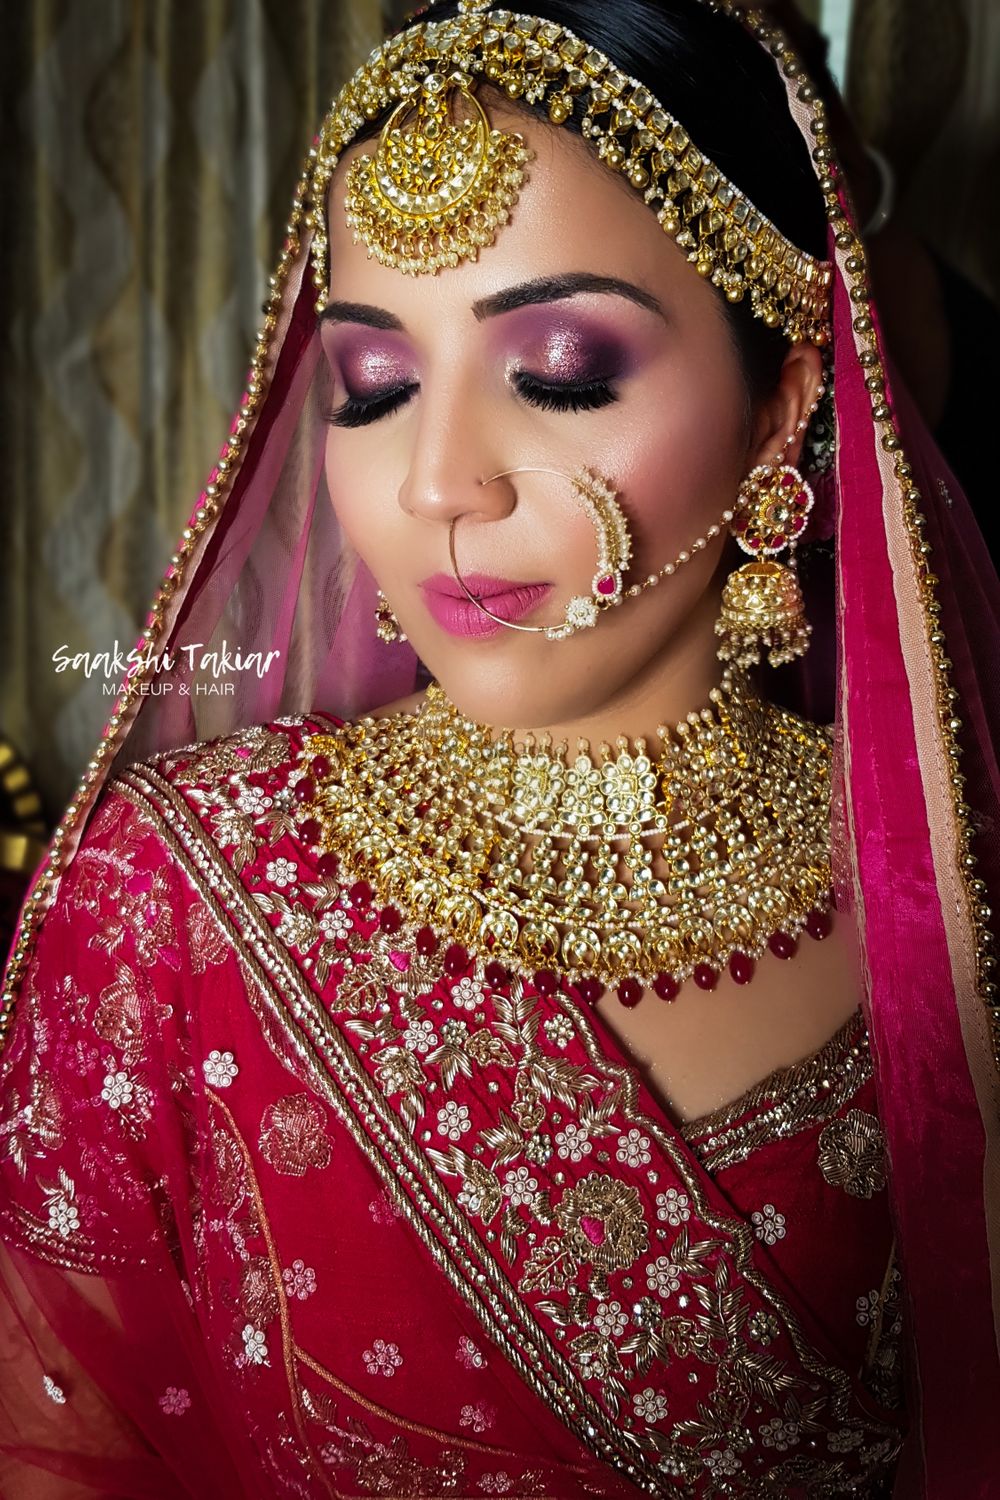 Photo From Vashti’s Wedding Makeup - By Makeup by Saakshi Takiar